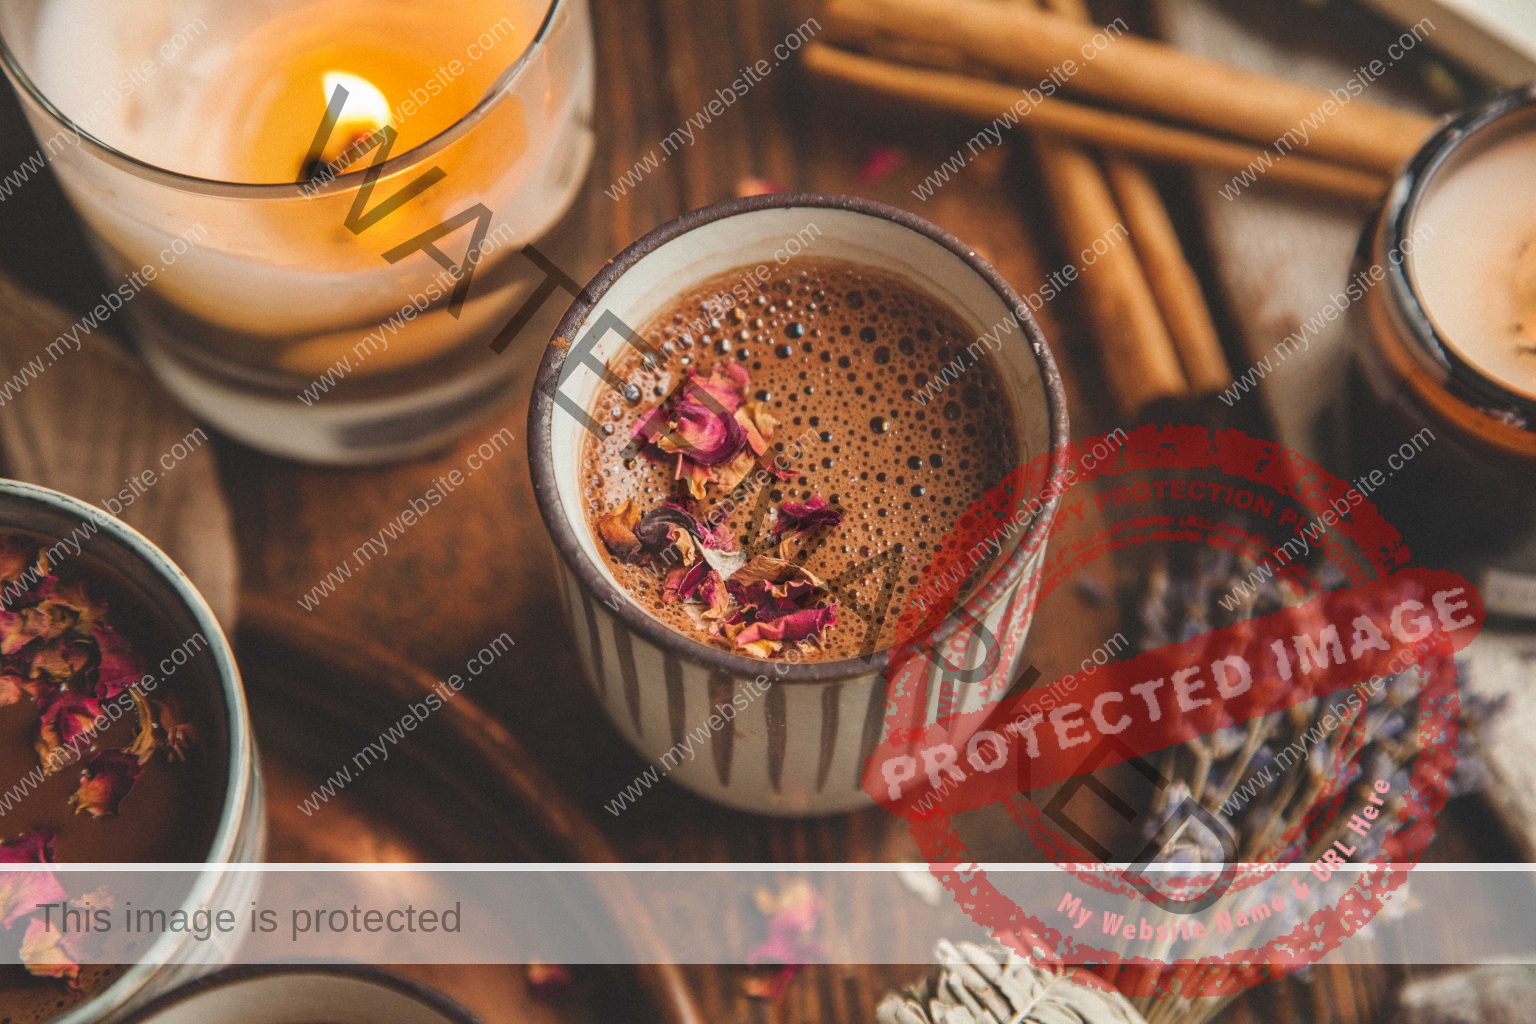 Prepared cacao in cup on table next to a candle